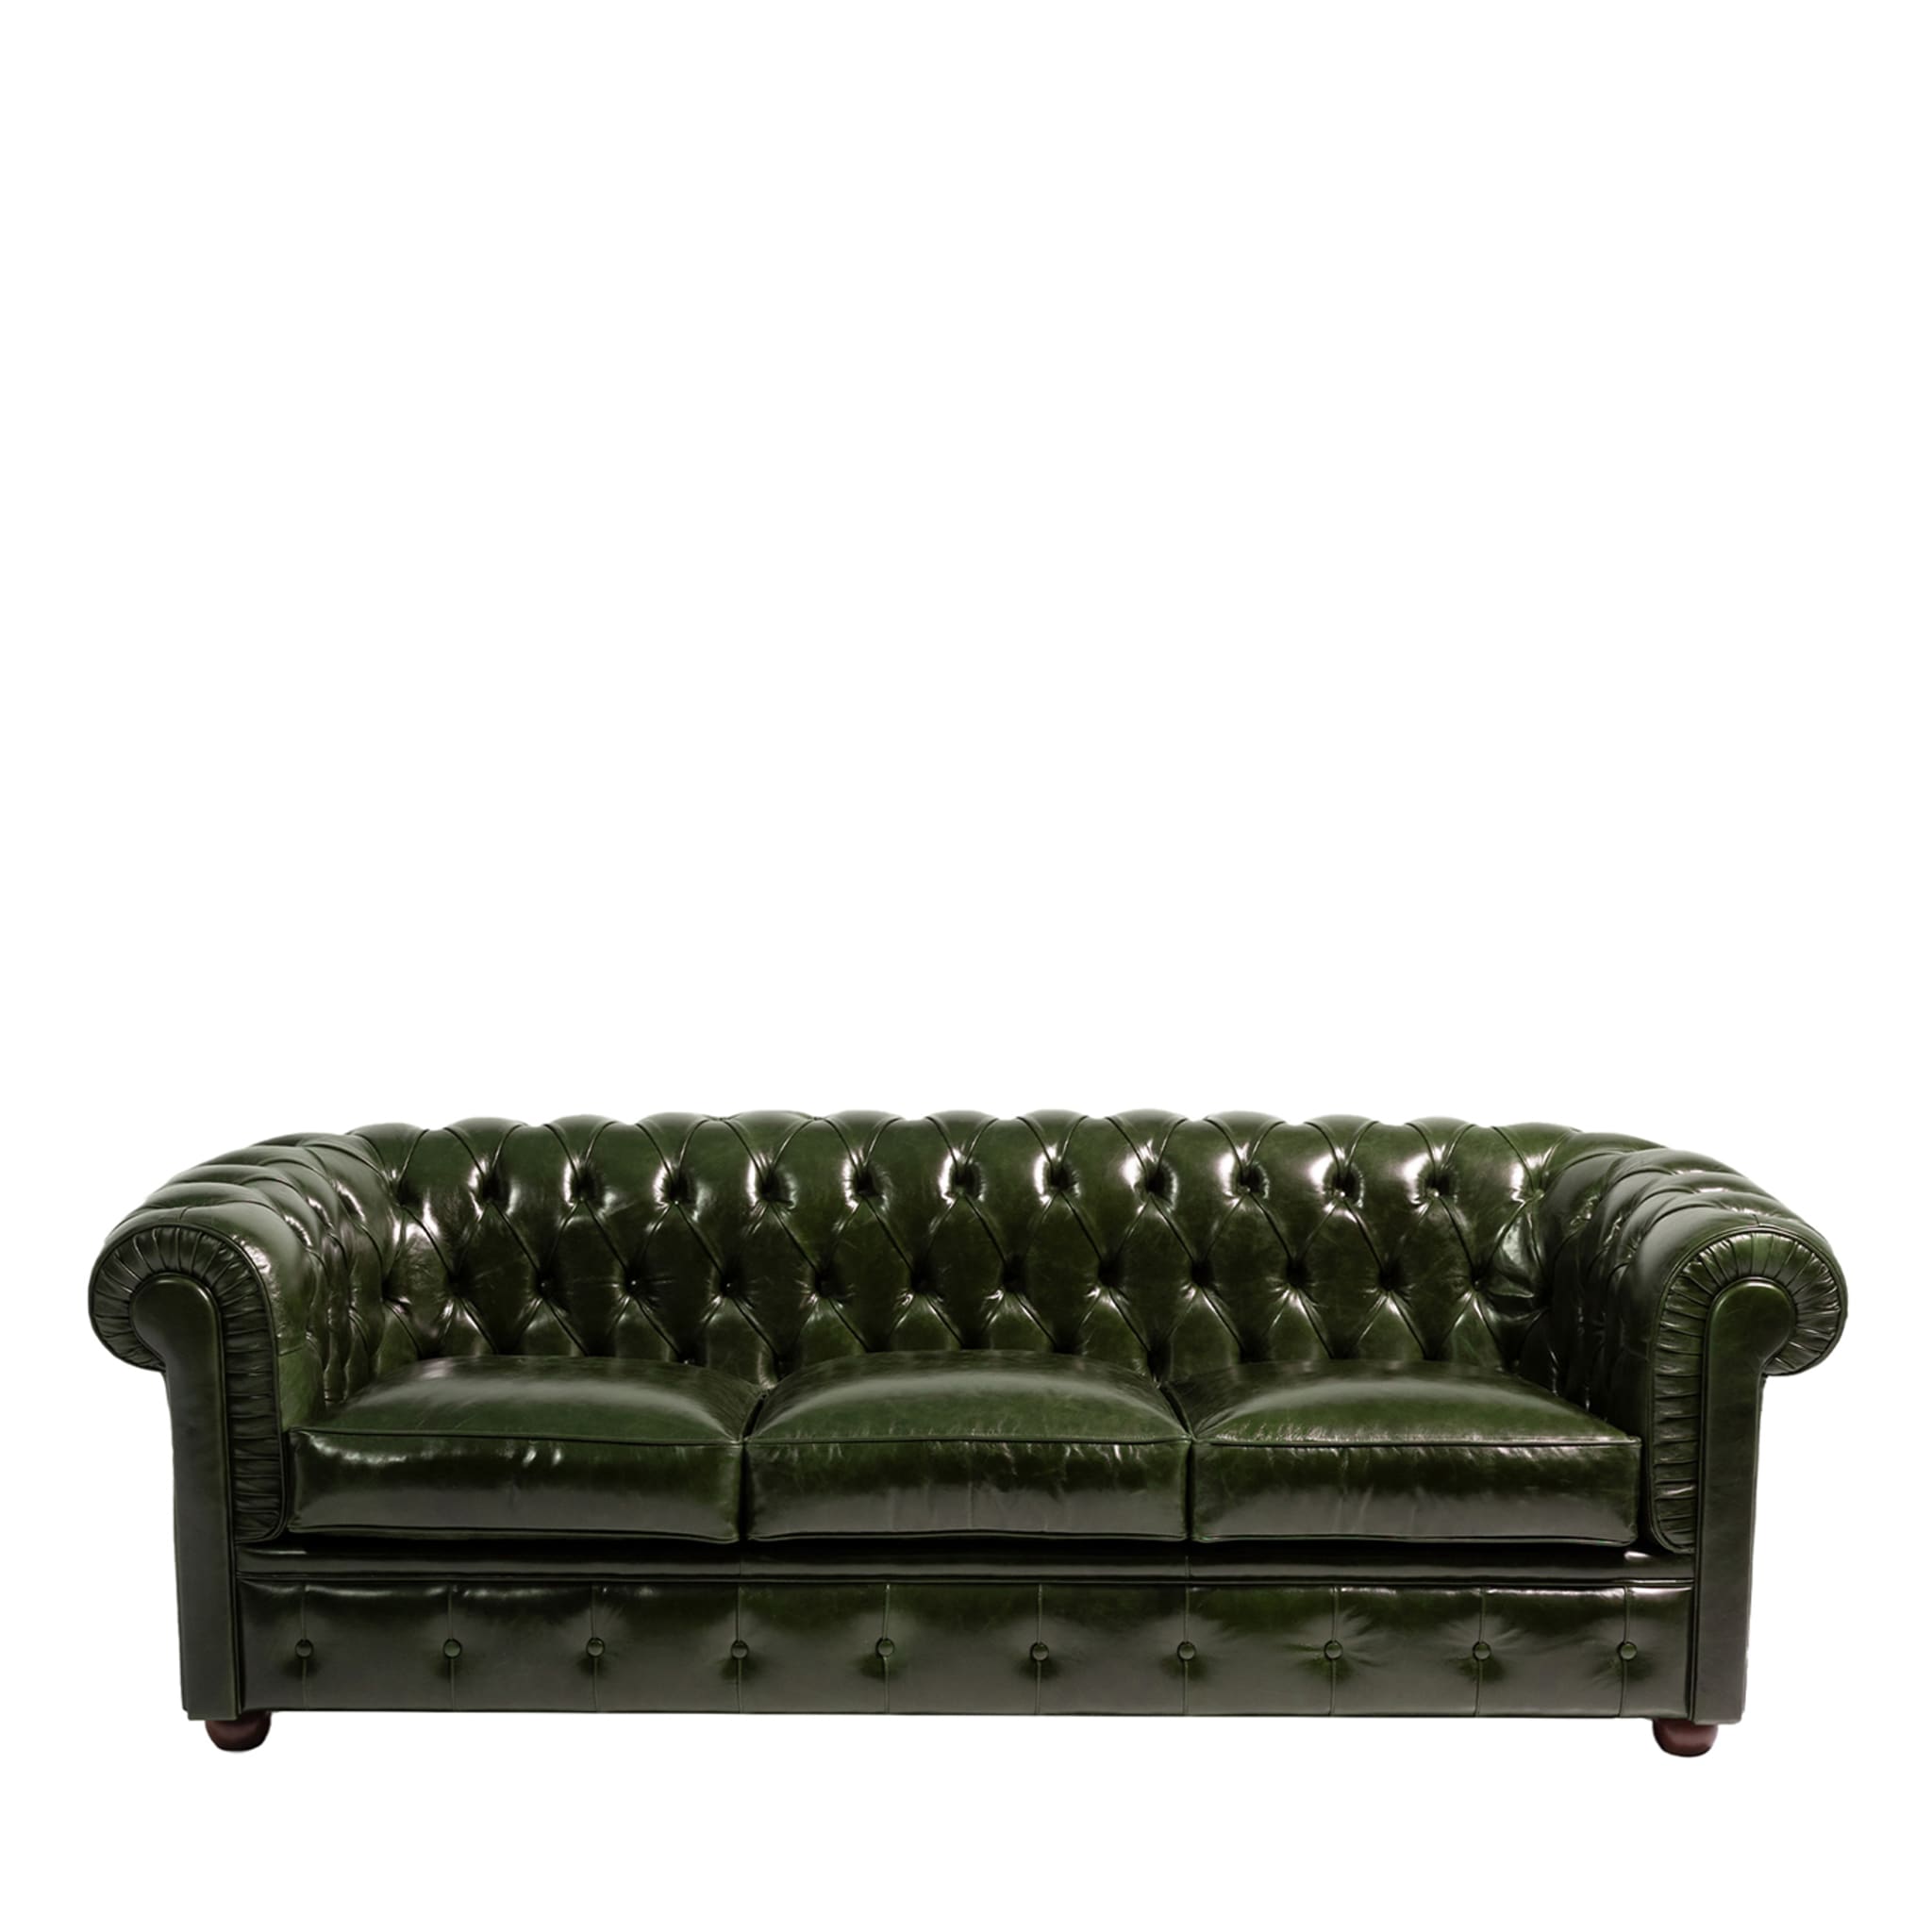 Chesterfield Green Leather 3-Seater Sofa - Main view